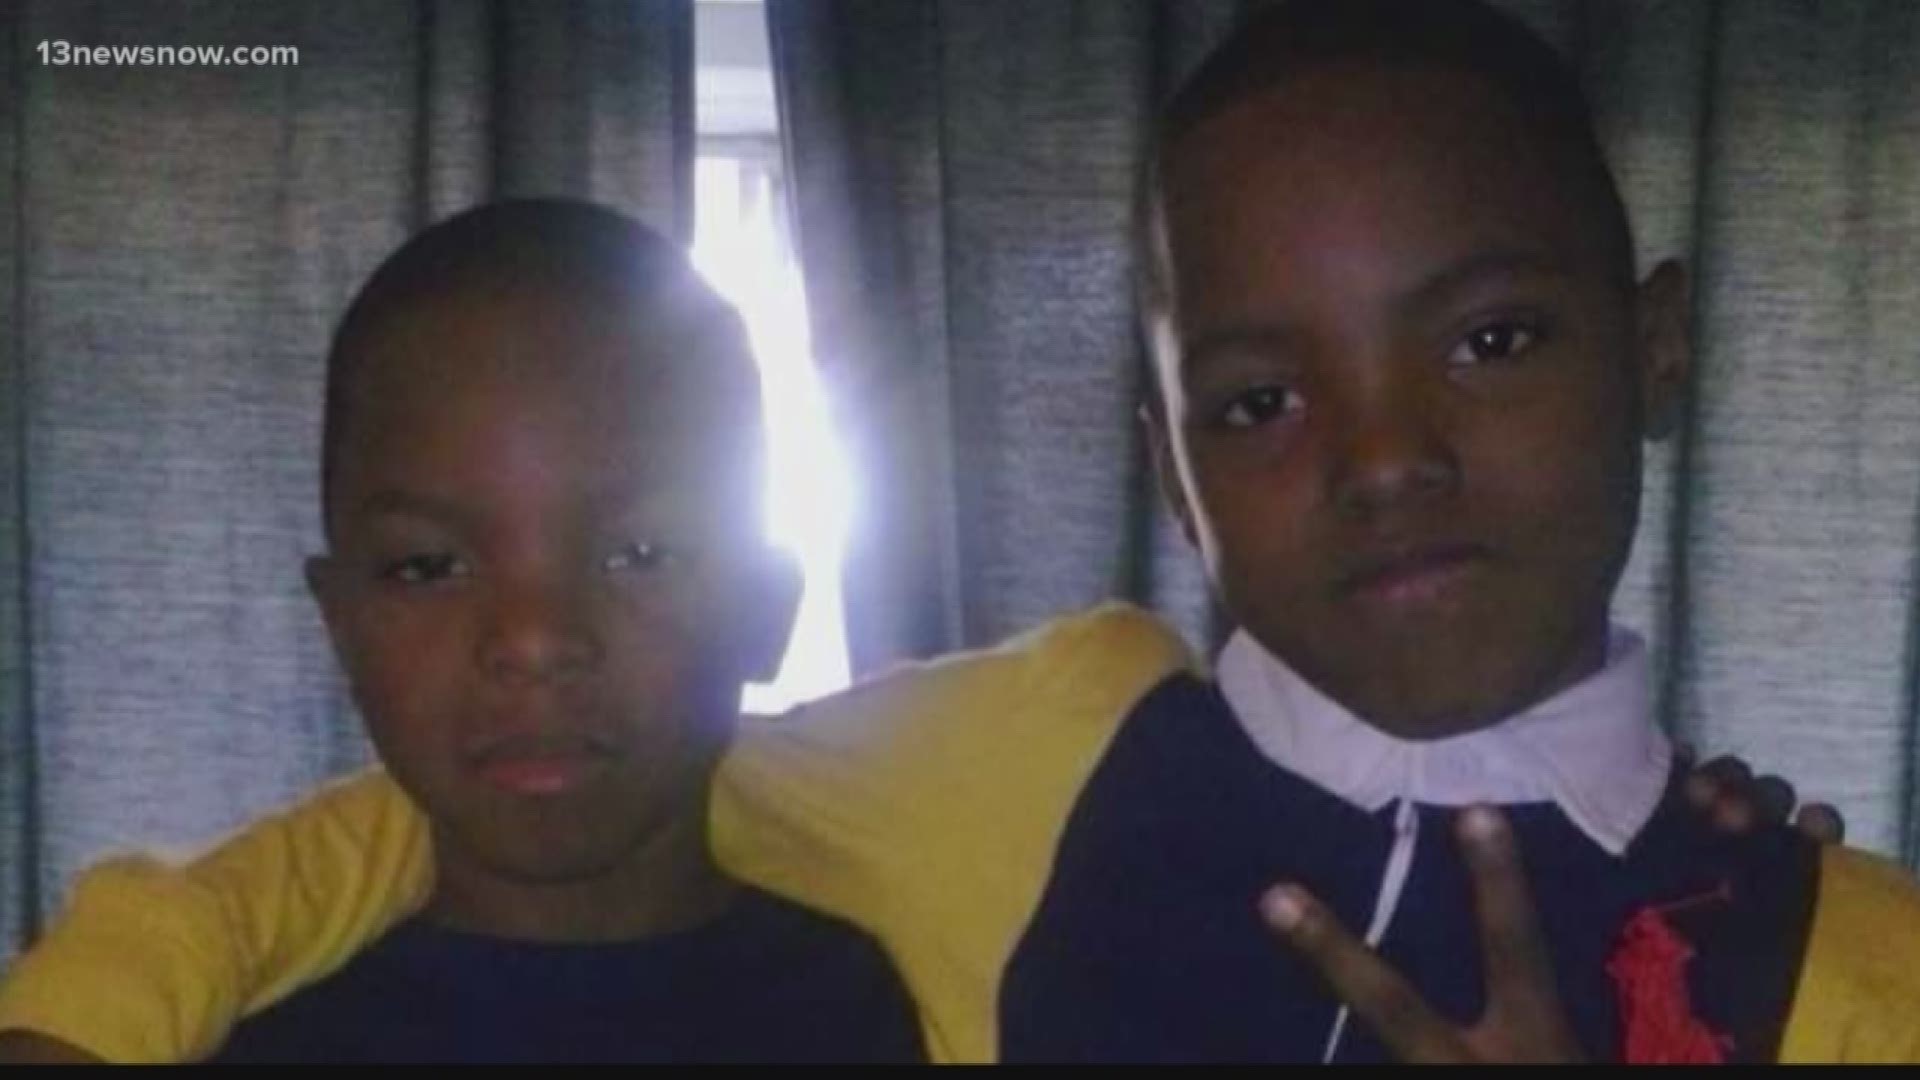 Kemon Battle, a 12-year-old, was shot and killed. Now his shooter has been arrested.